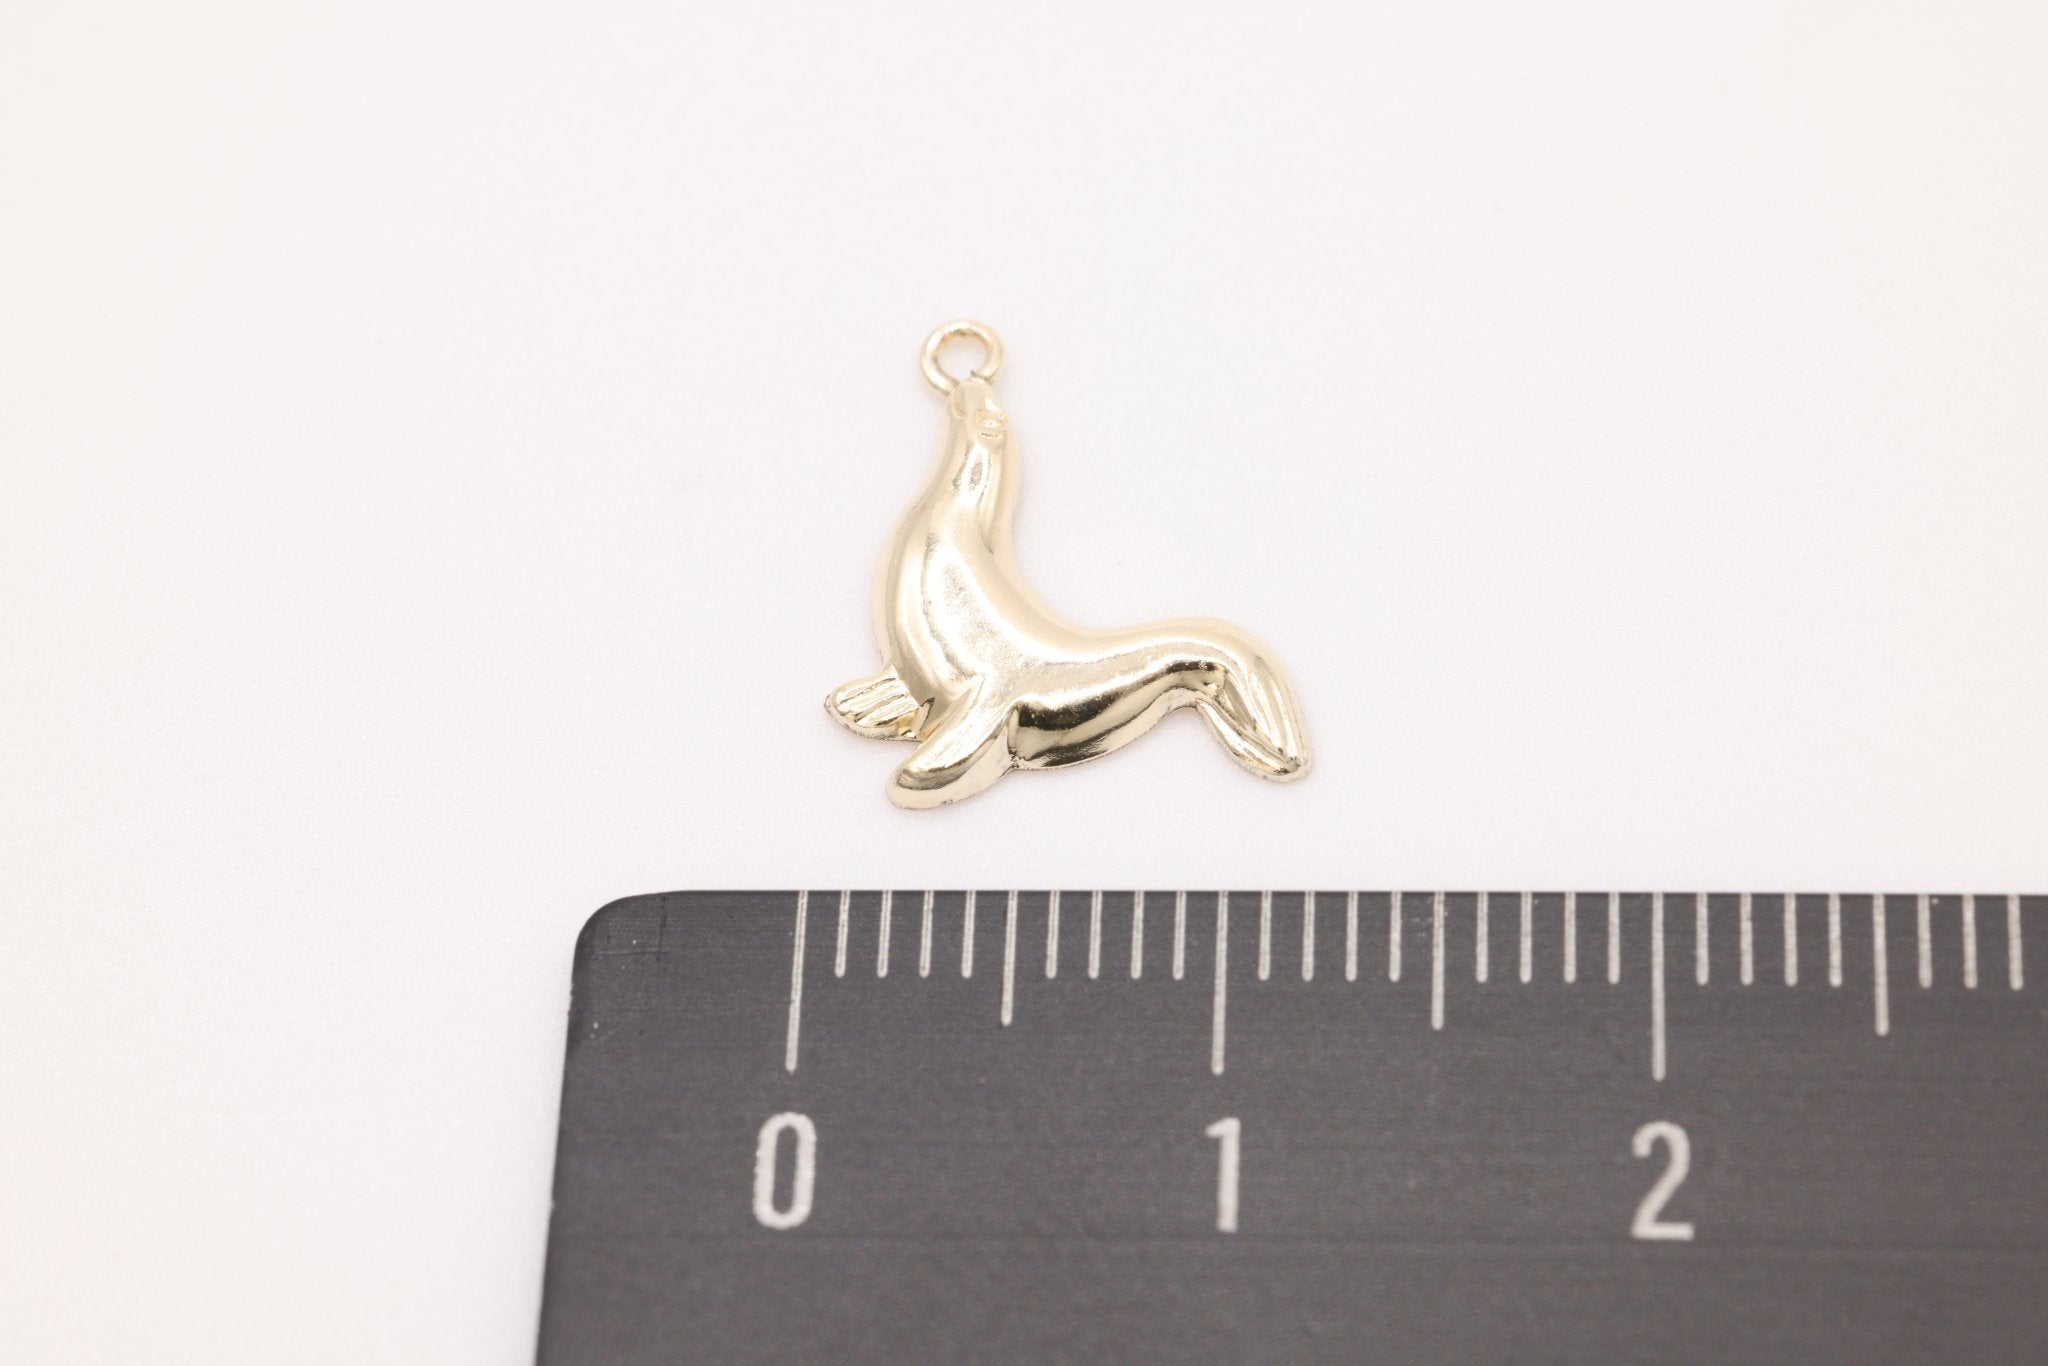 Seal Charm, 14K Gold - Filled, Stamped Seal Sealife Charm, Jewelry Making Charm - HarperCrown